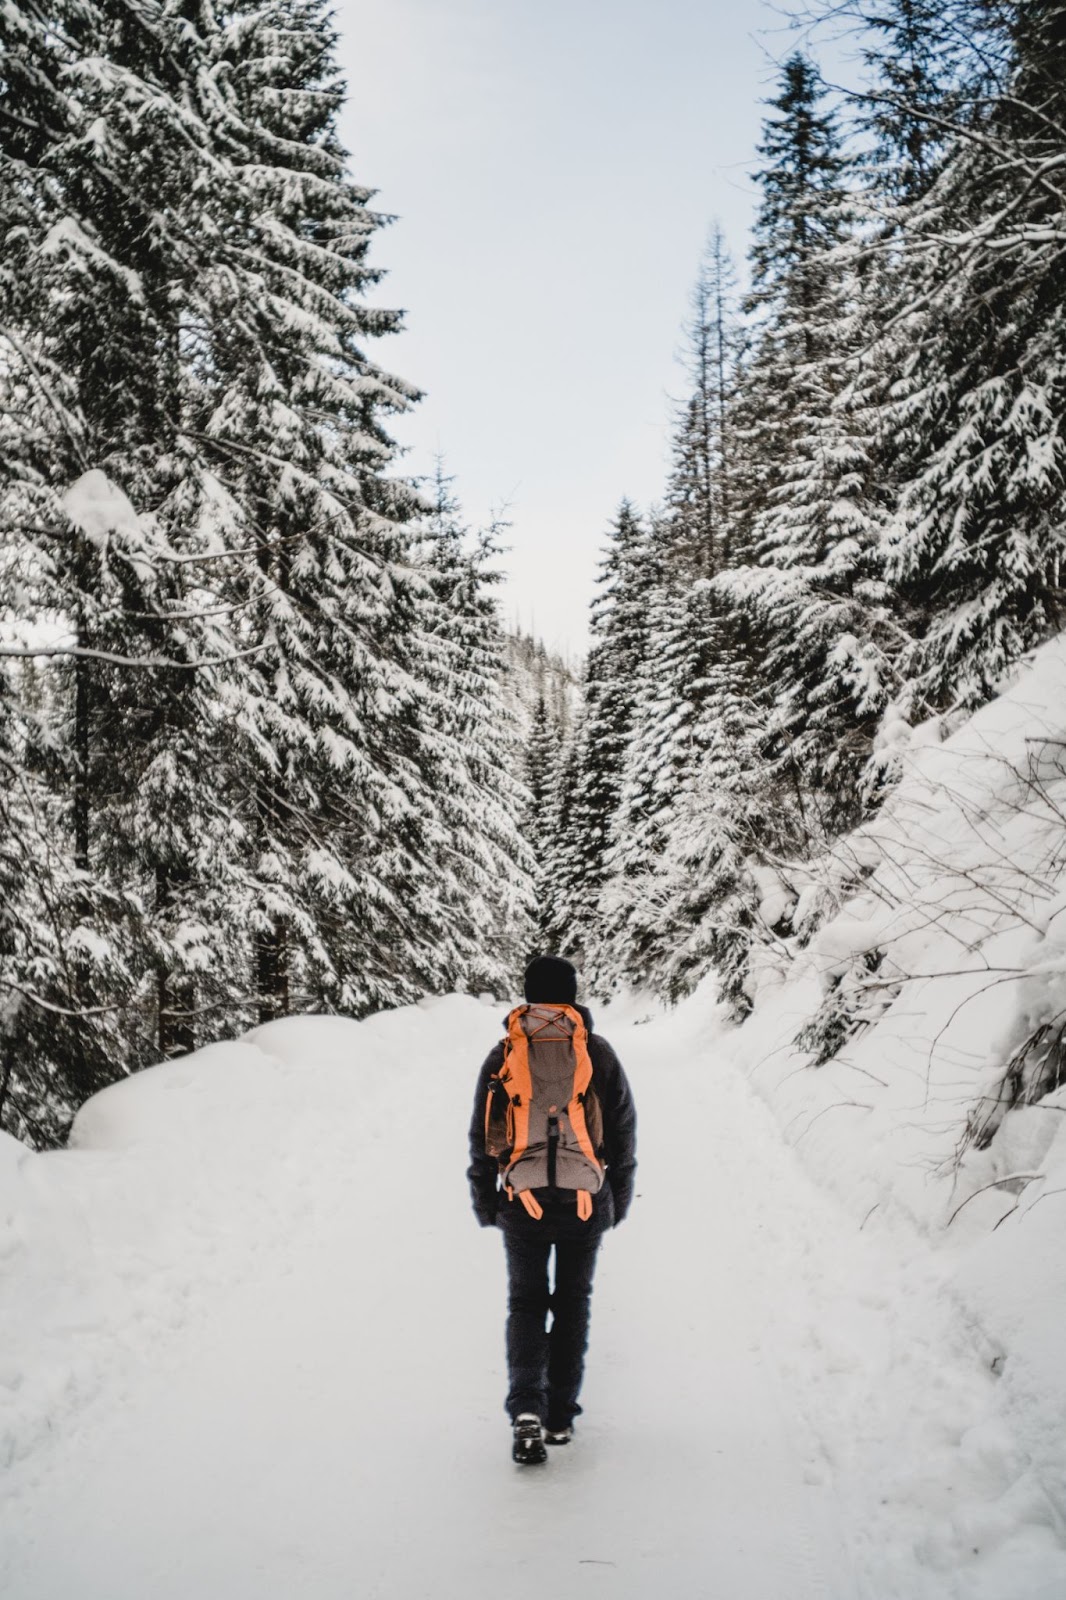 A calming winter hike through the snow and forest